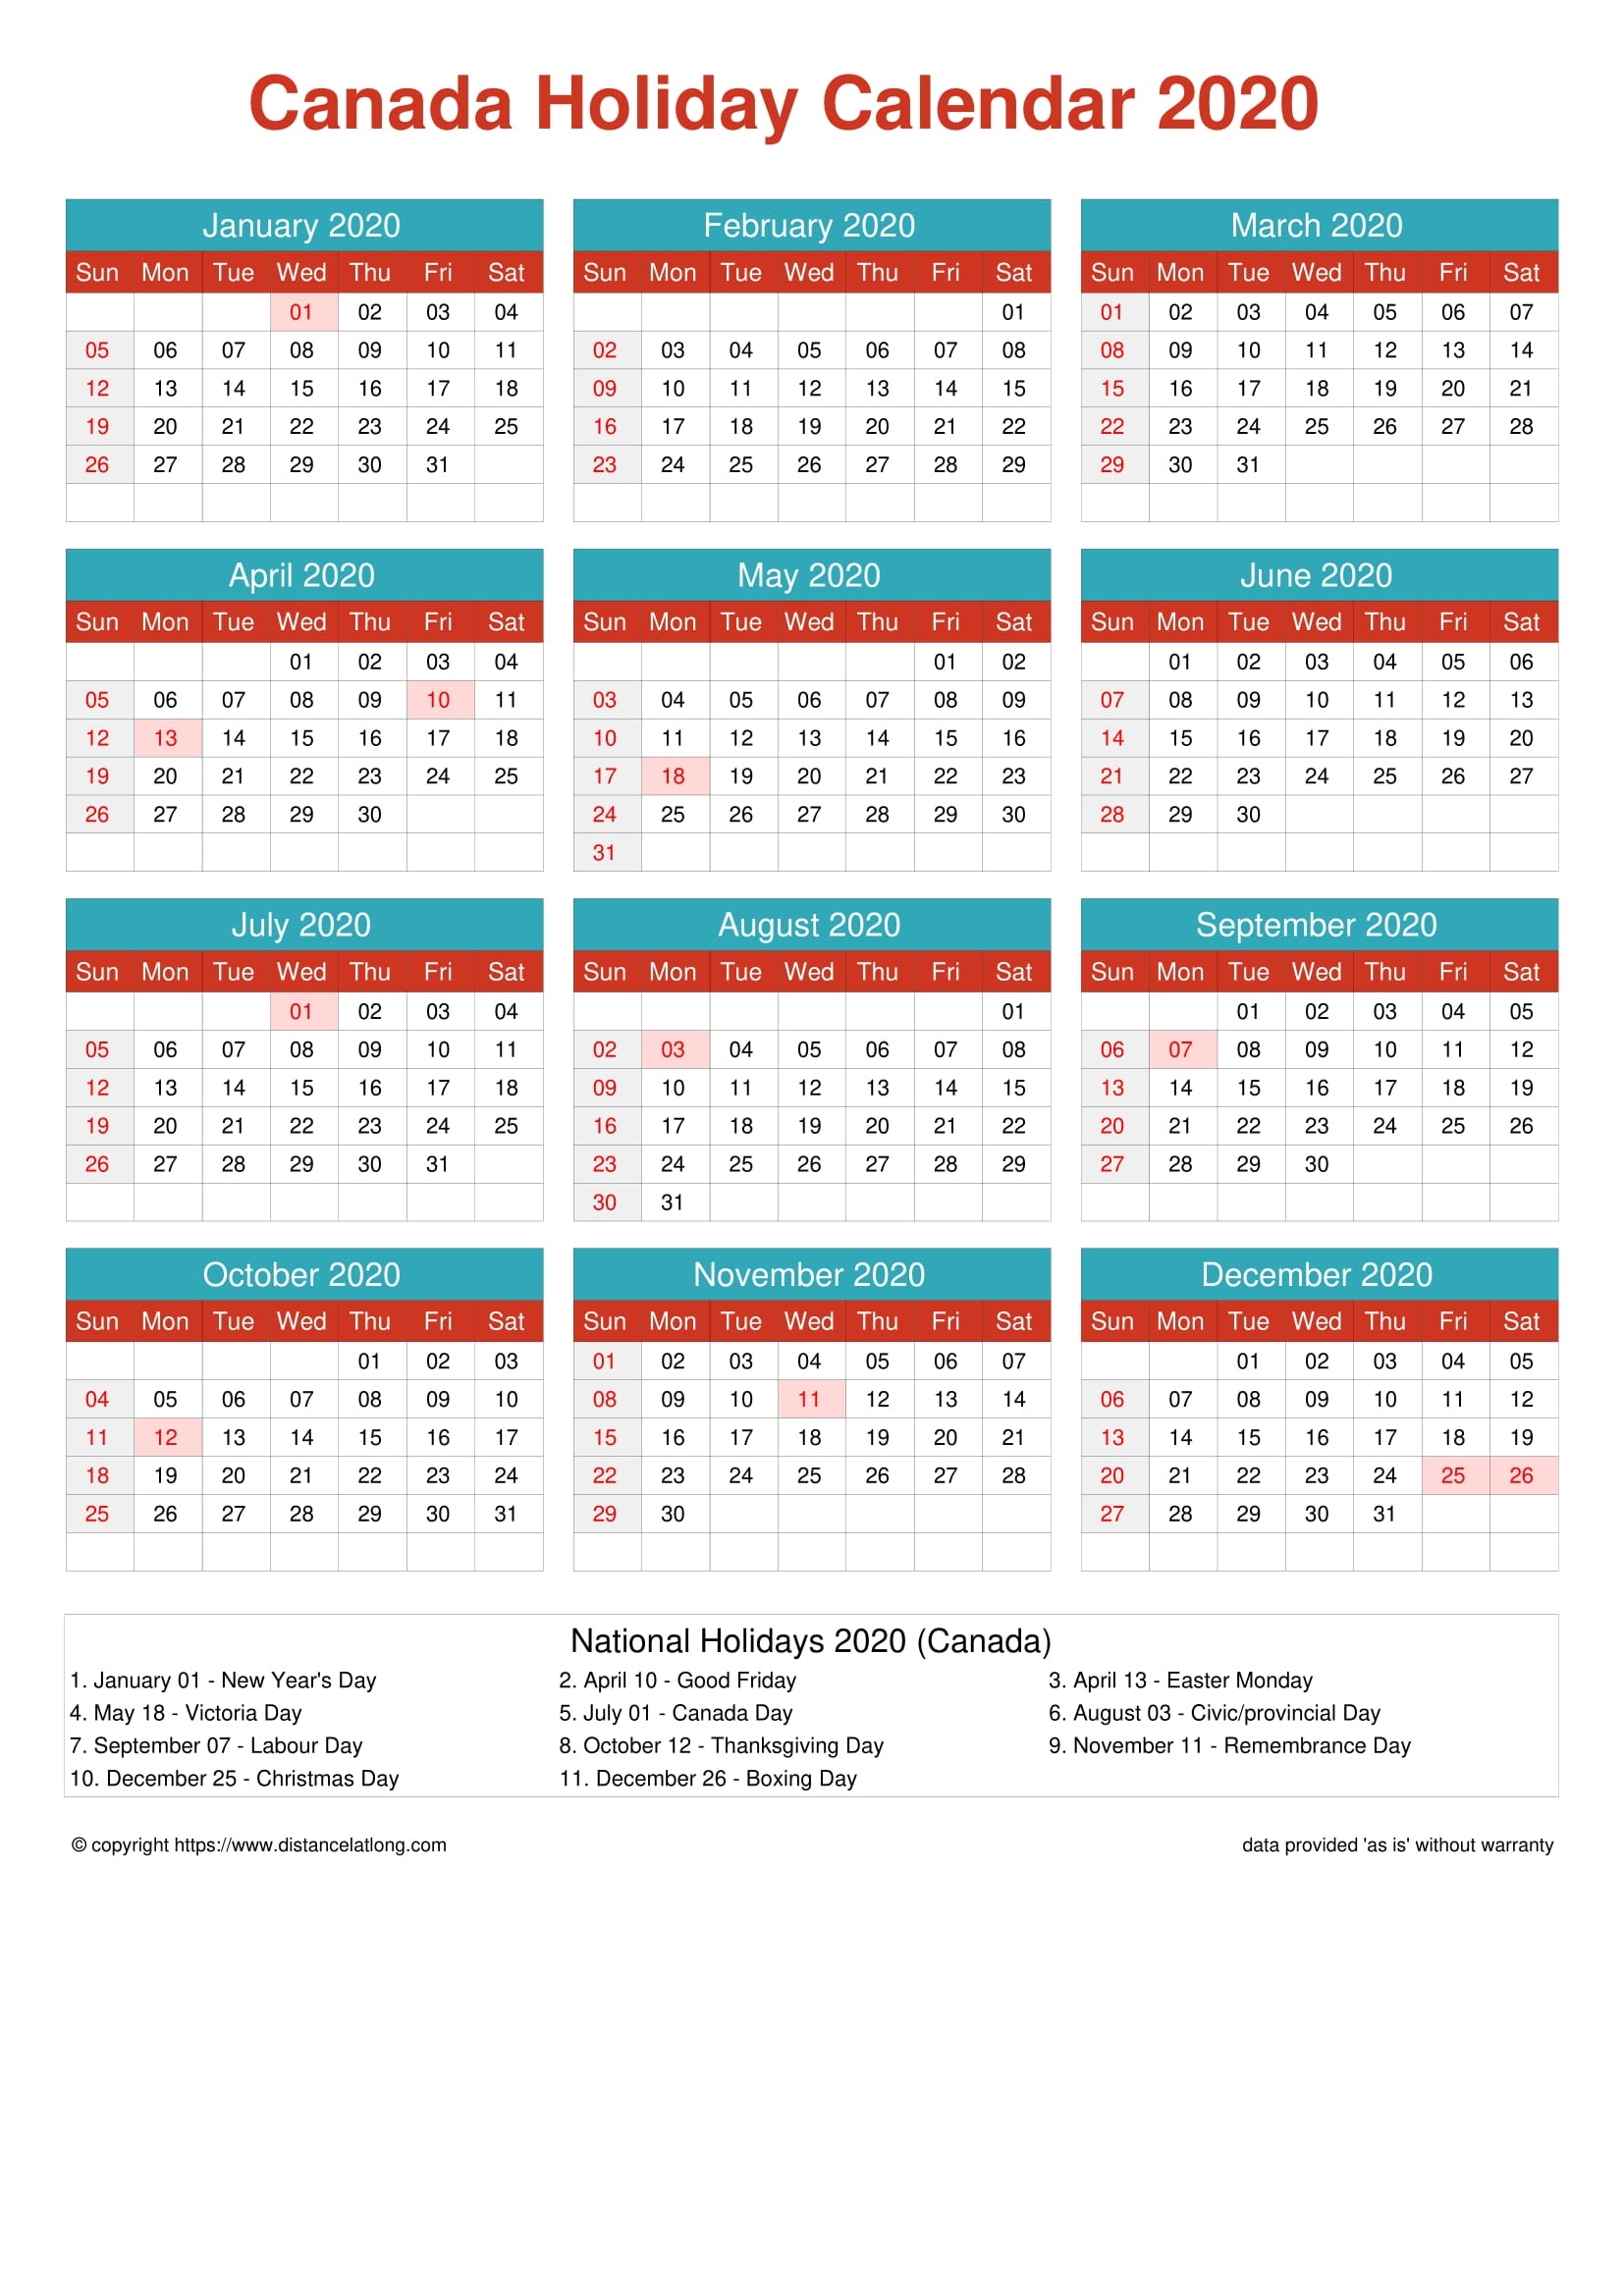 Canada Holiday Calendar 2020 Jpg Templates - Distancelatlong Calendar Of Religious Events For Canadian Jews In 2020